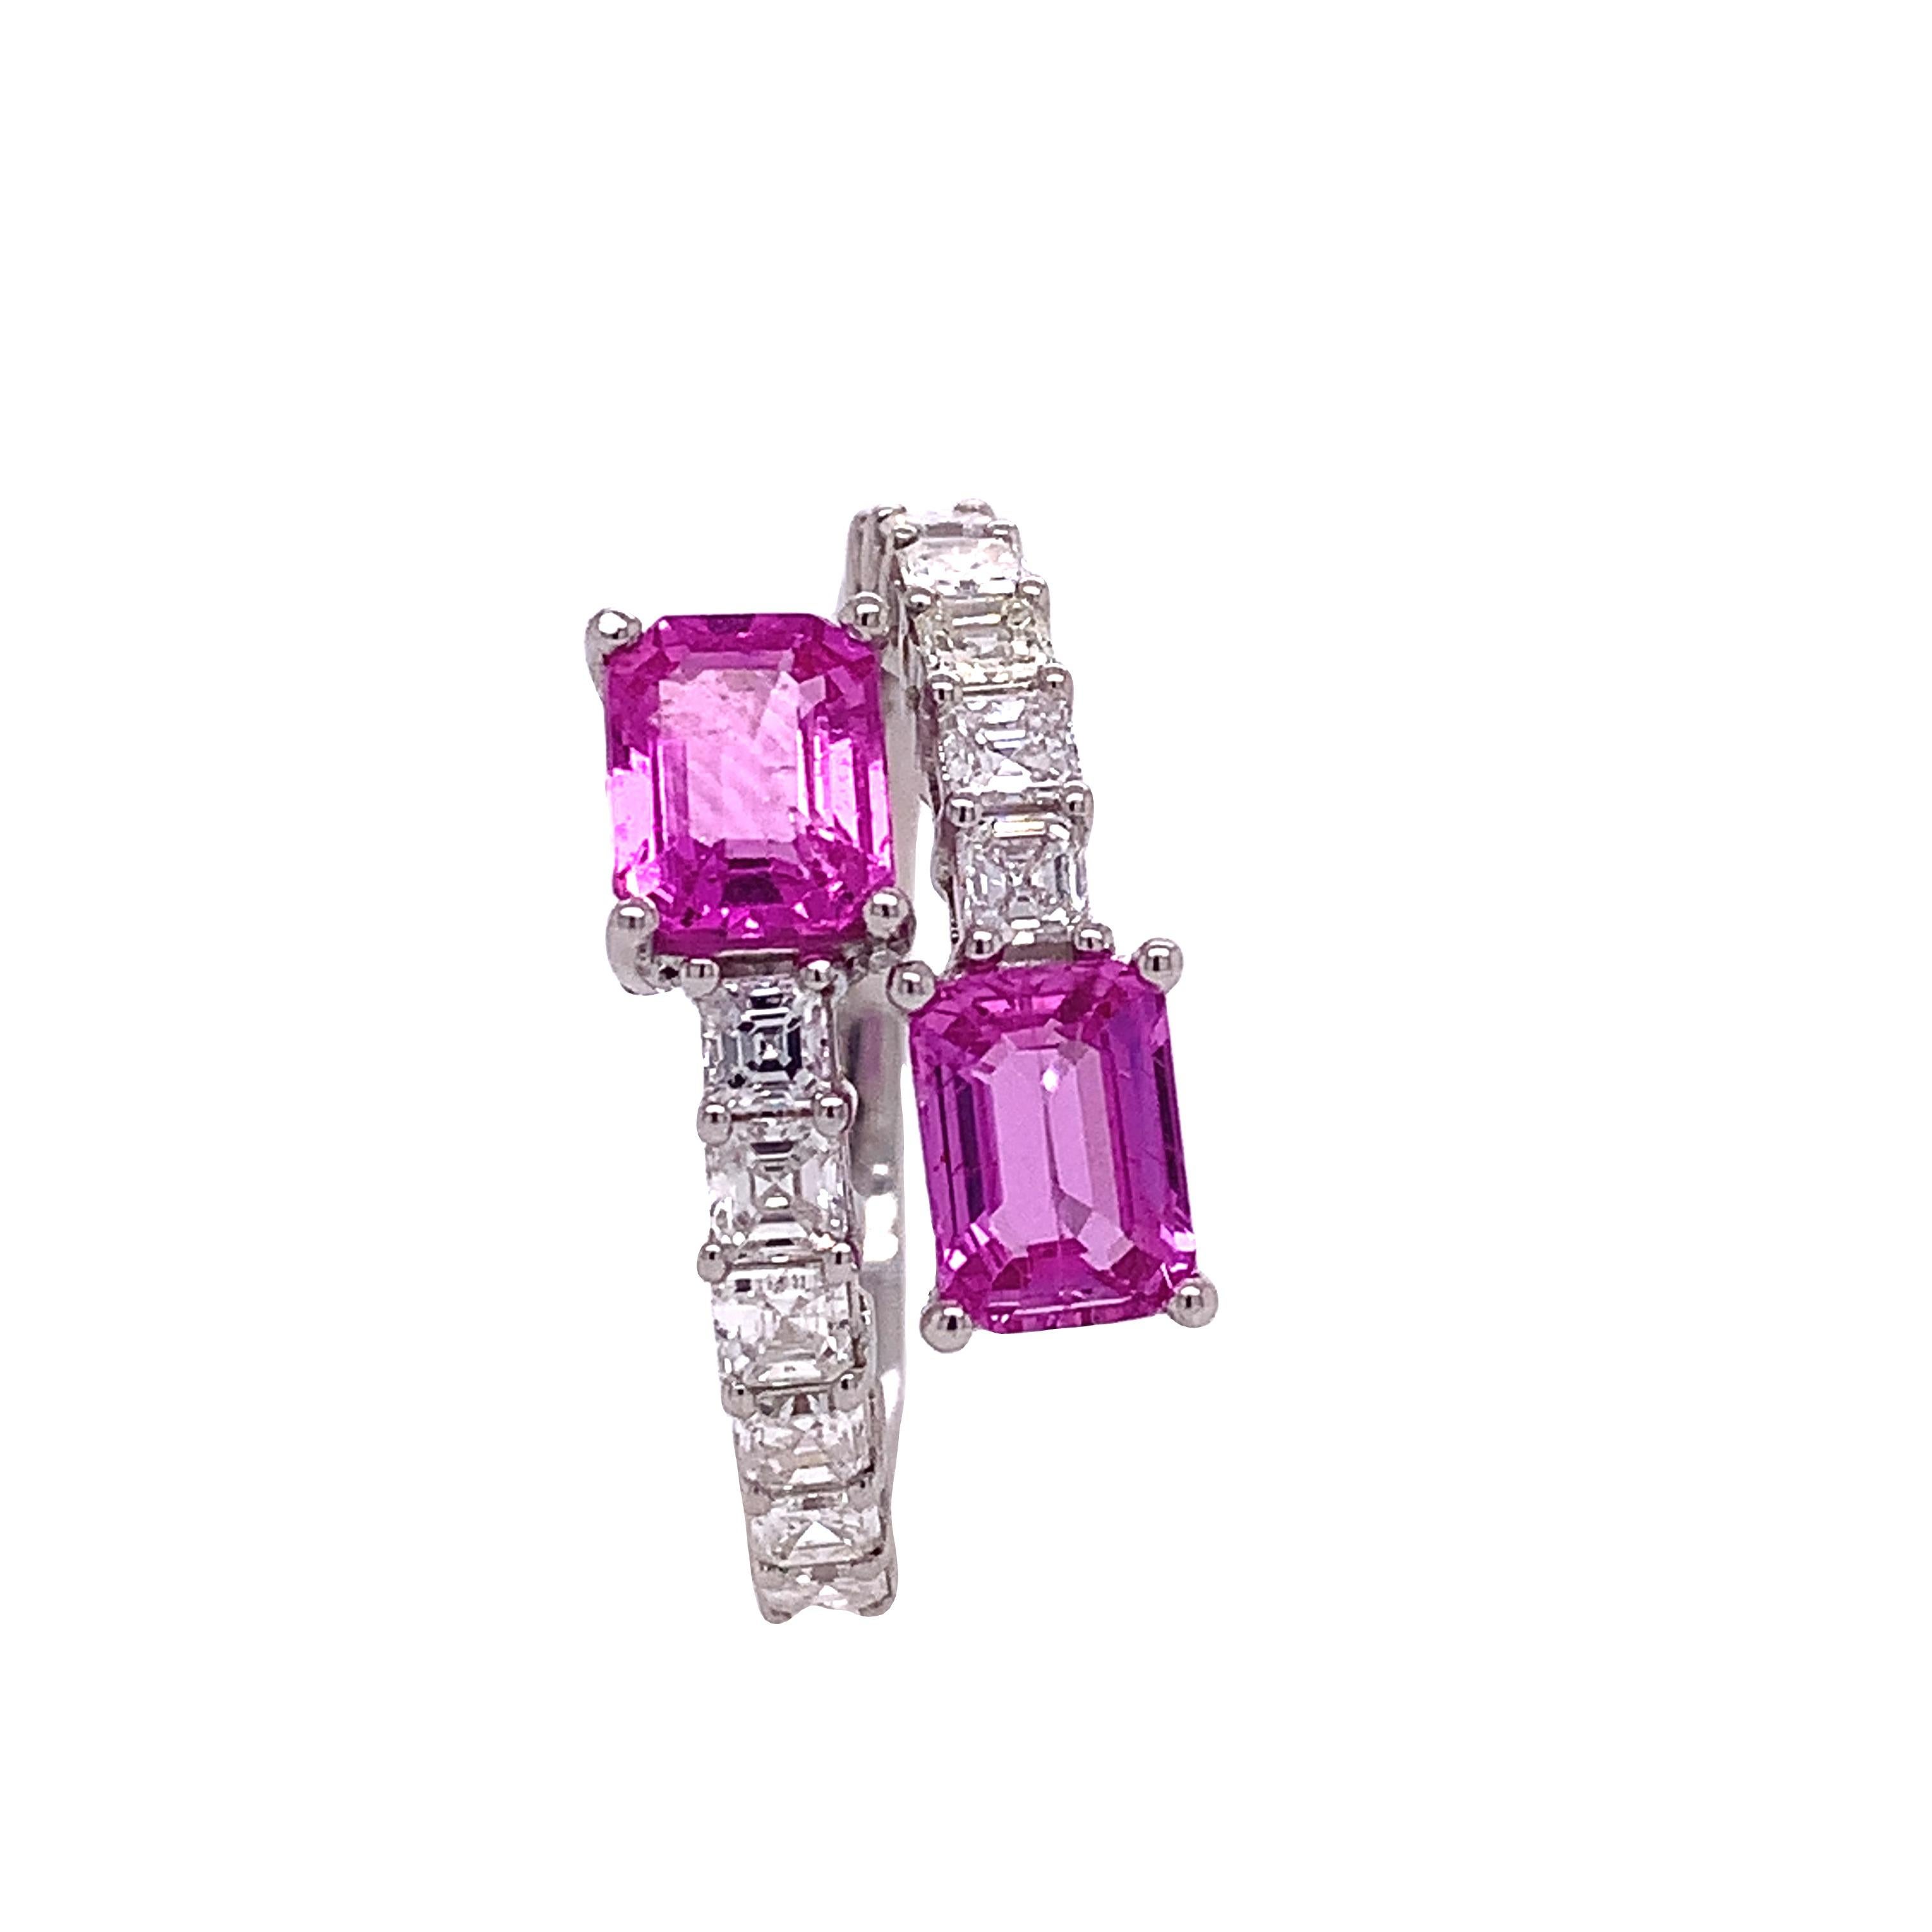 Pink Rose Collection

This 18K white gold ring is set with Pink Sapphire in the center linked by diamonds .The two center stone and the halo are set in a by-pass style; thereby, allowing the diamond to sparkle and the pink sapphire to stand